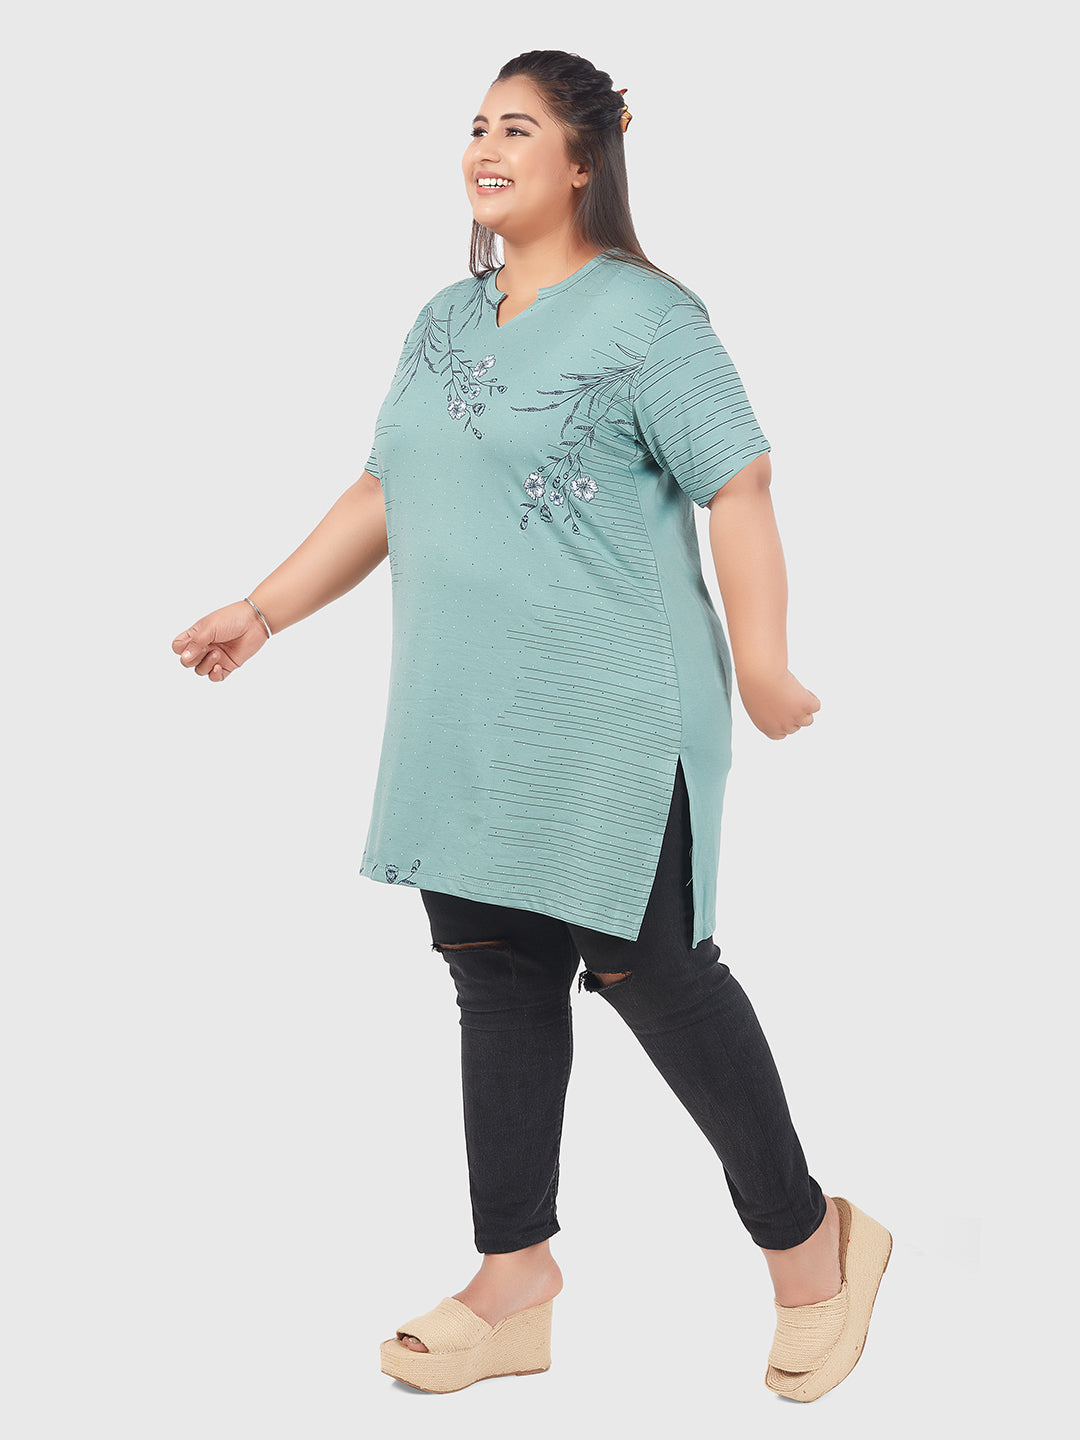 Plus Size Printed Long Tops For Women Half Sleeves - Sage